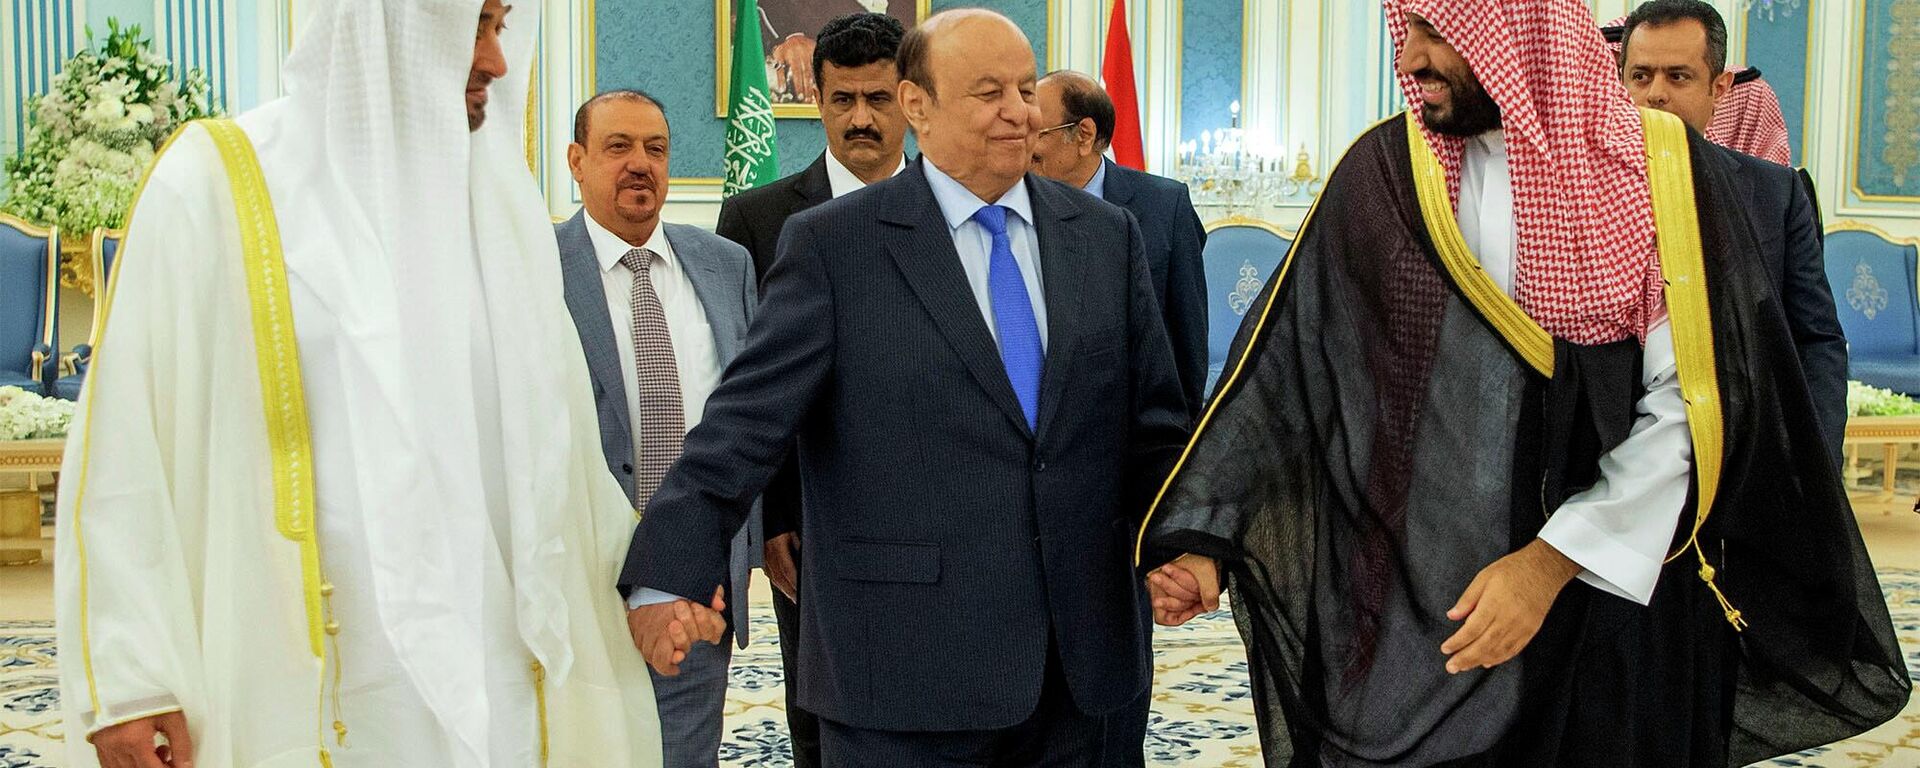 In this photo released by the Saudi Royal Palace, Yemen's president, Abed Rabbo Mansour Hadi, center, is accompanied by Saudi Arabia's Crown Prince Mohammed bin Salman, right, and Dhabi's crown prince, Mohammed bin Zayed Al Nahyan before signing a power-sharing deal in Riyadh, Saudi Arabia, Tuesday, Nov. 5, 2019. - Sputnik International, 1920, 17.04.2022